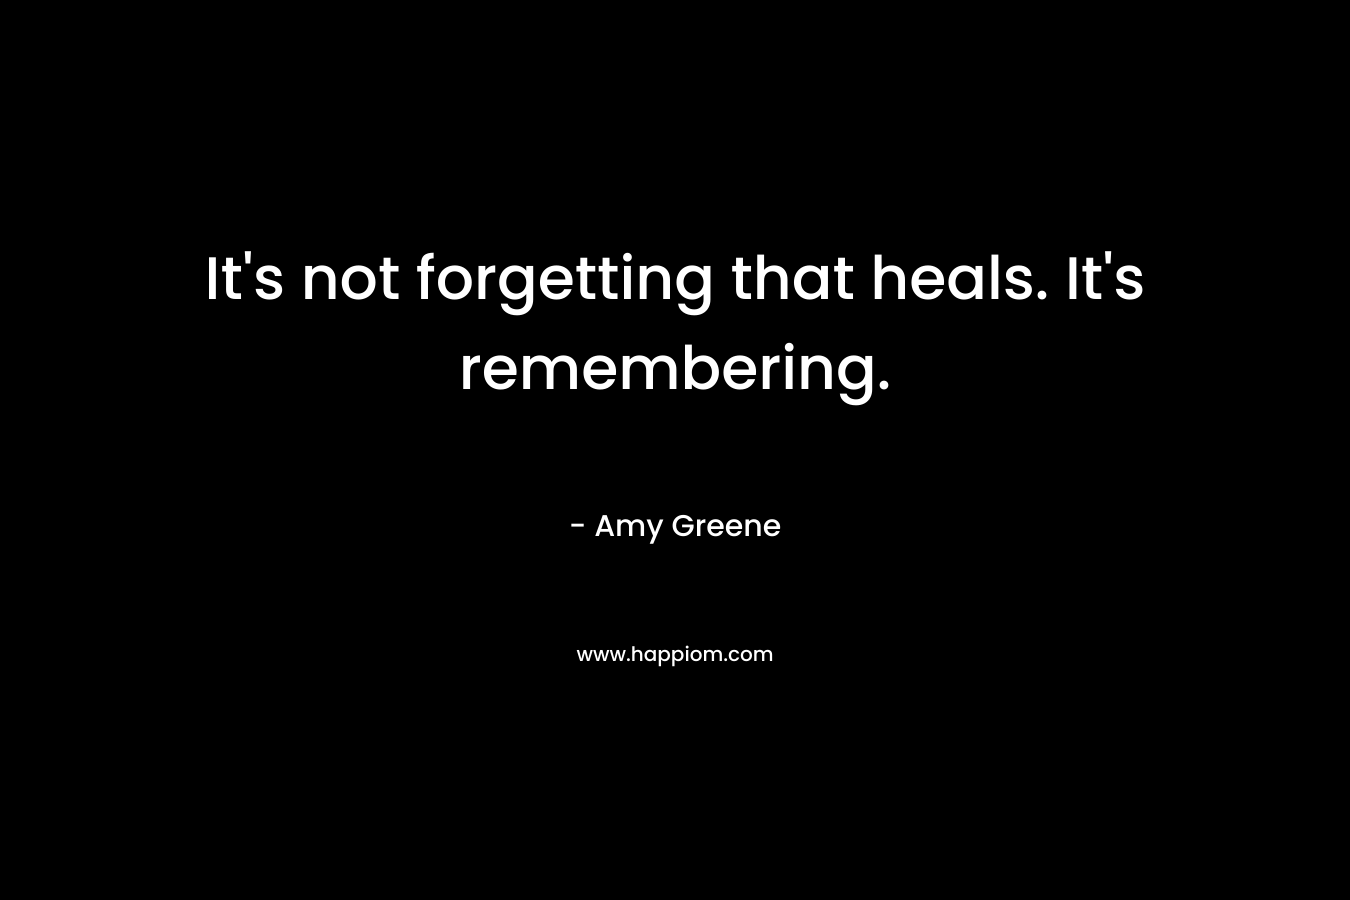 It’s not forgetting that heals. It’s remembering. – Amy Greene